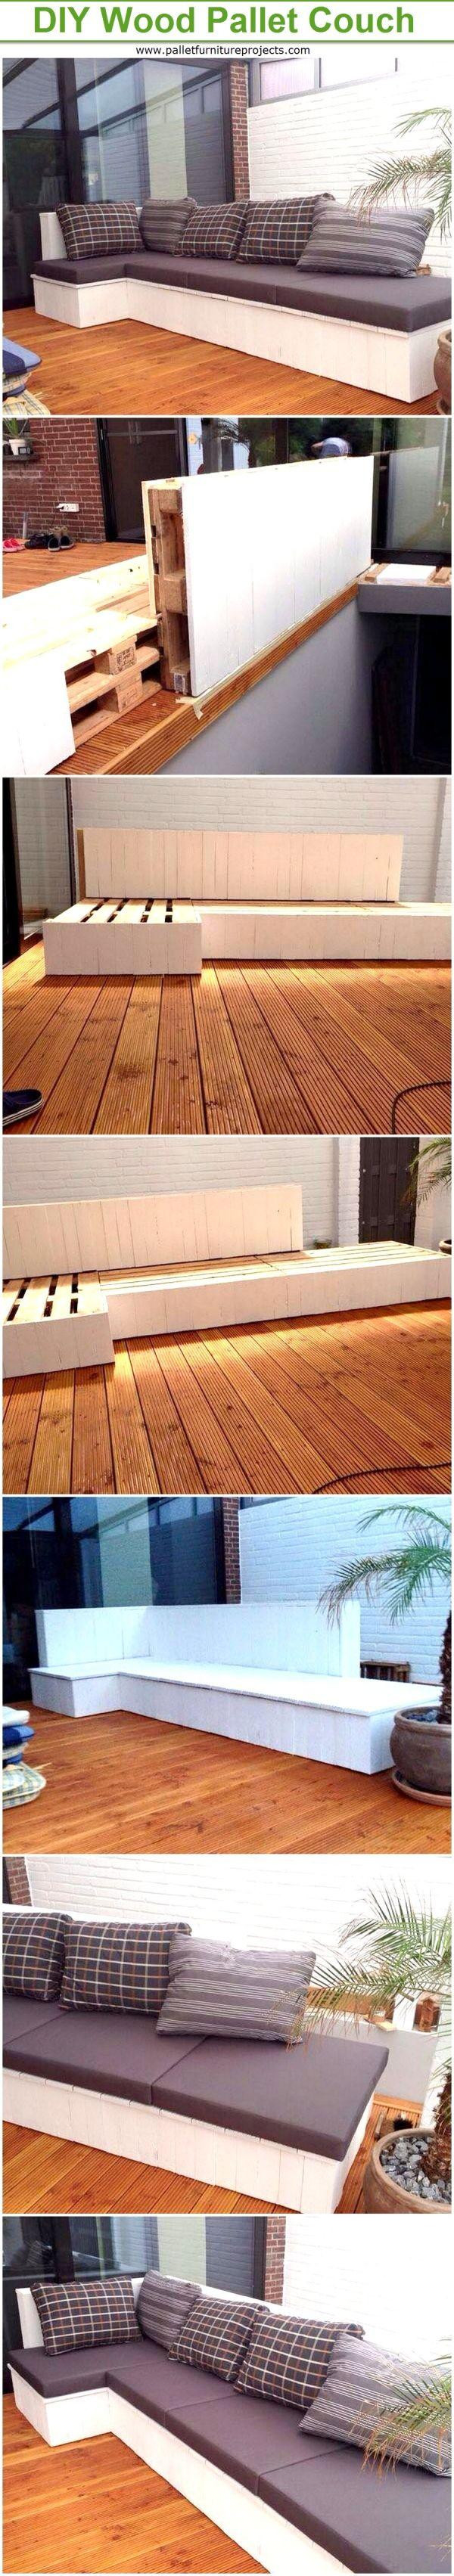 13 Cute Do It Yourself Hardwood Floor Cleaner 2024 free download do it yourself hardwood floor cleaner of diy wood pallet projects inspirational 547 best diy furniture from throughout diy wood pallet projects inspirational diy wood pallet cushioned couch